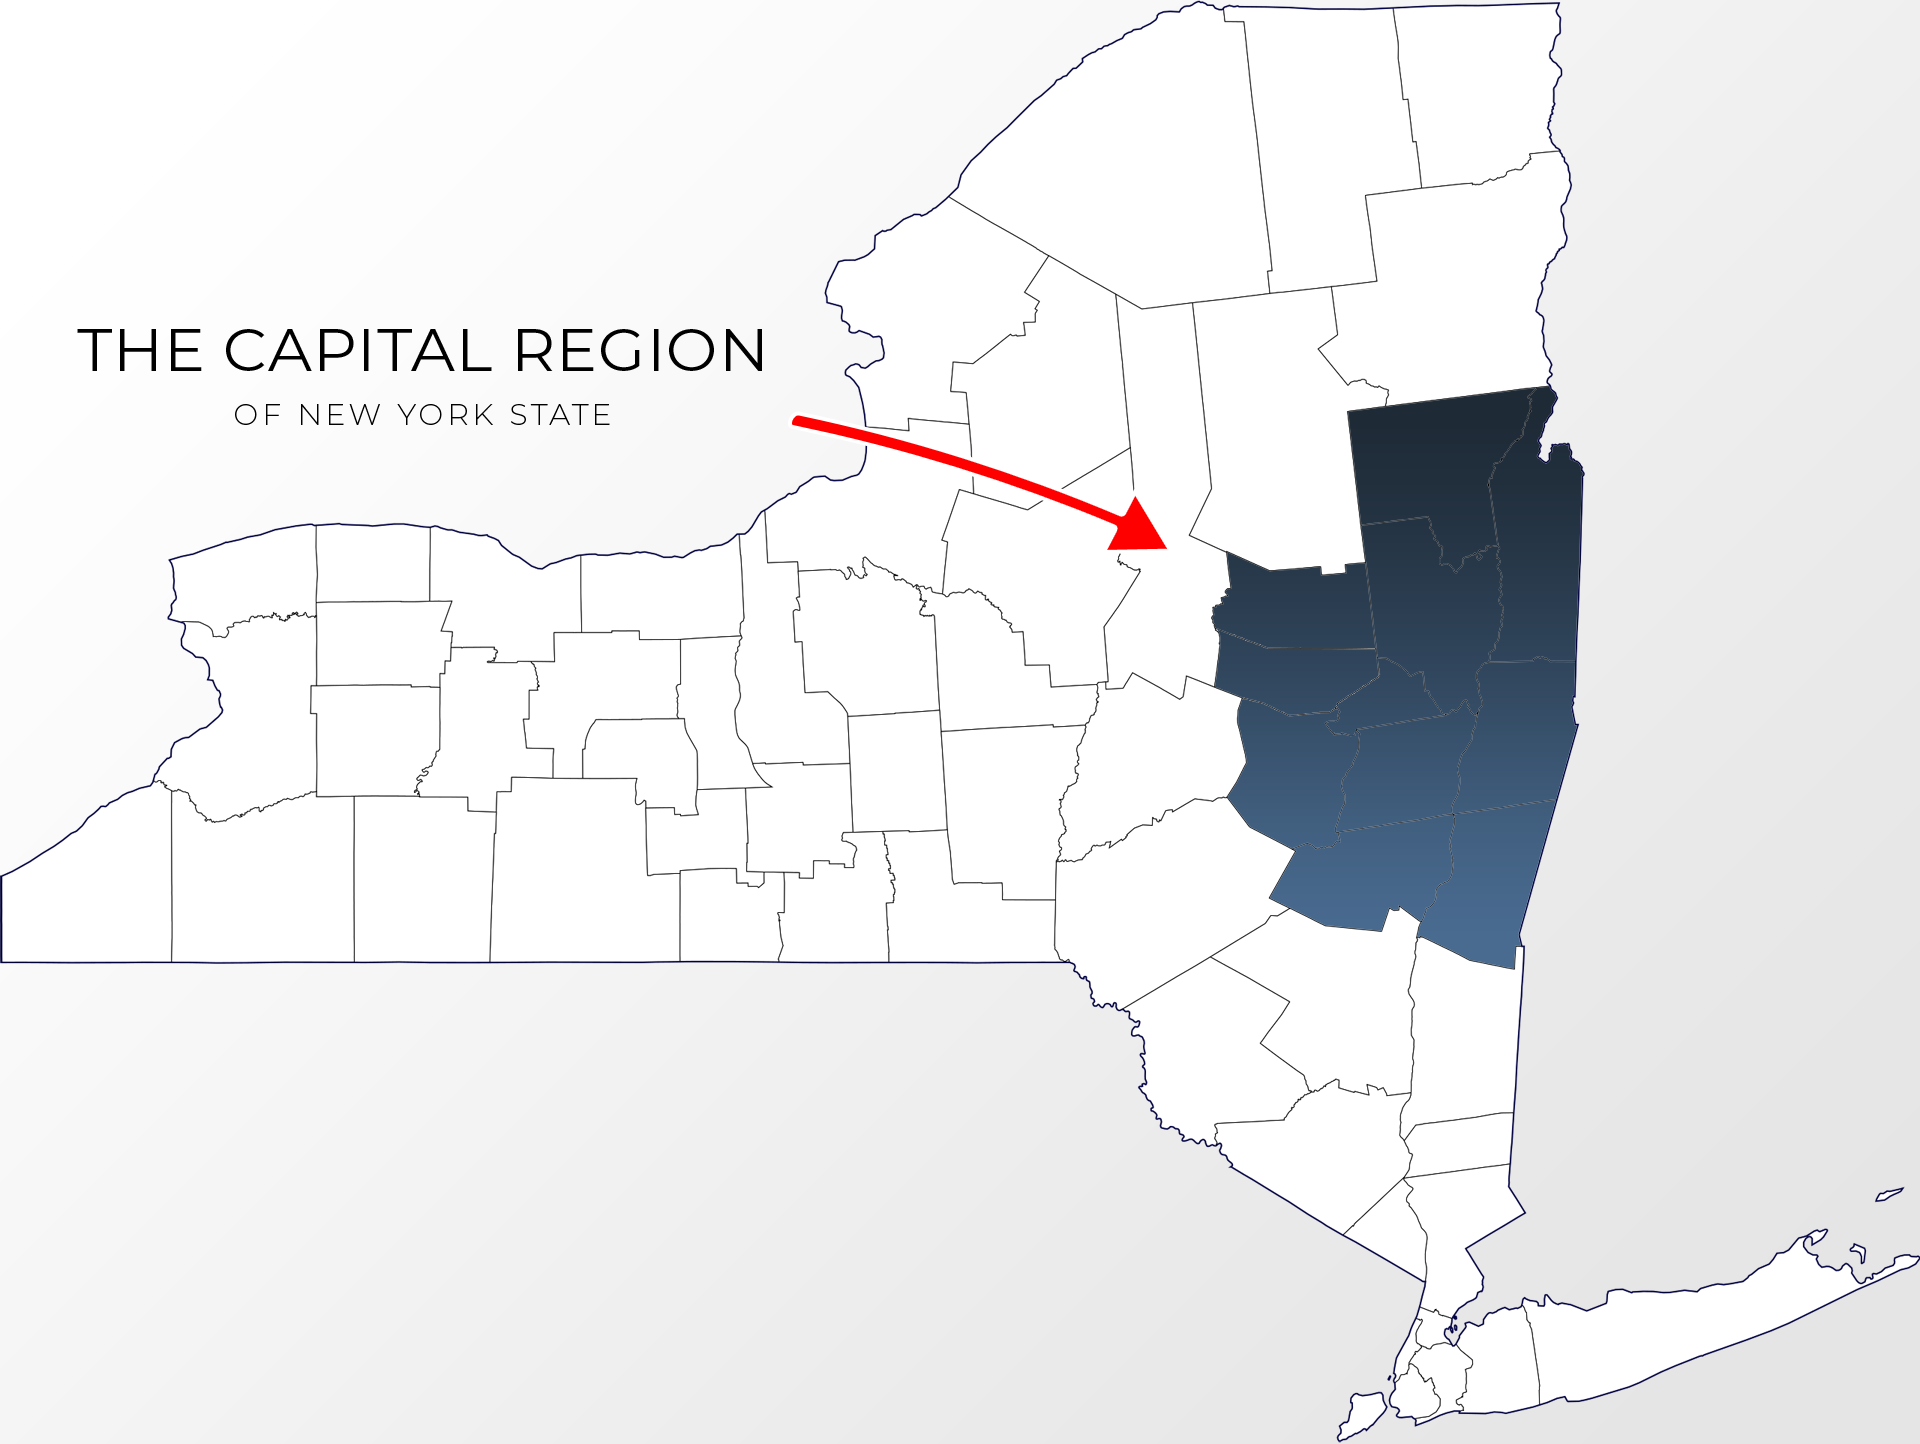 A county map of New York State that outlines the Capital Region real estate market, which is the group of 11 counties surrounding the state capital in Albany.